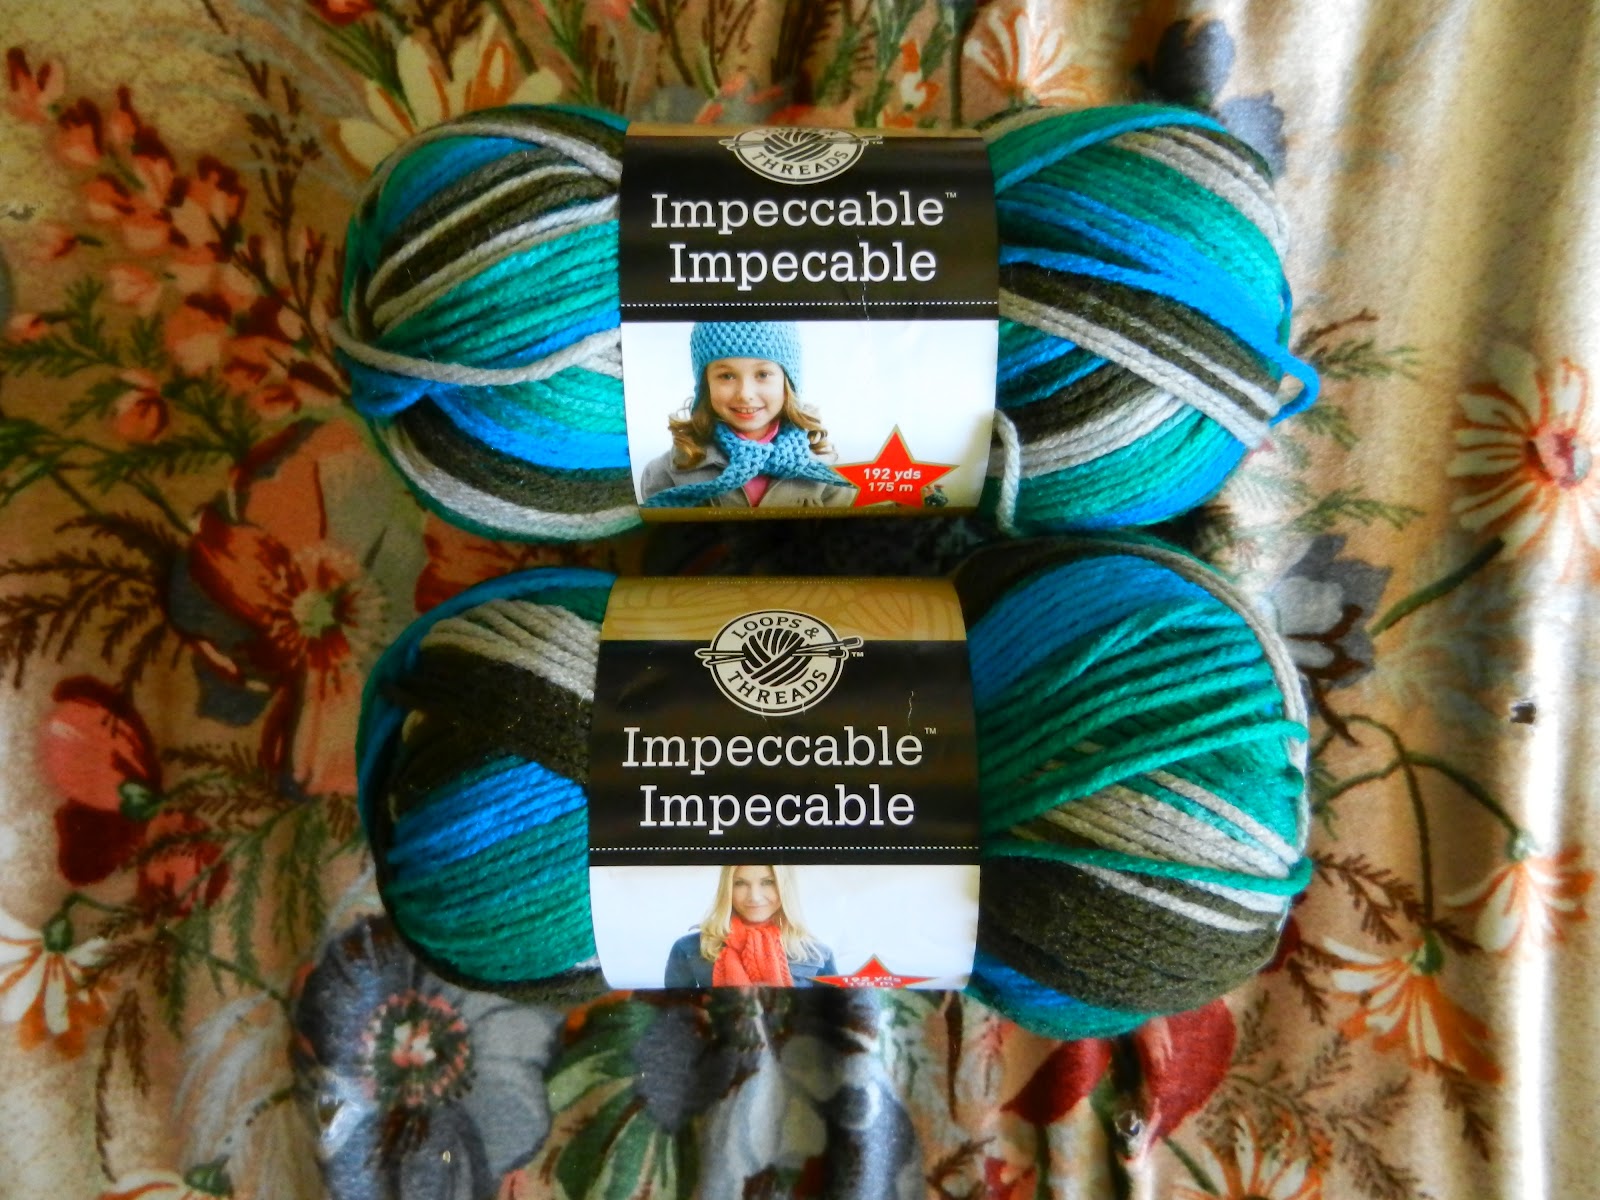 NEW Yarn Loops and Threads Textured Twist #yarnreview #honestreview  @michaels #loopsandthreads 